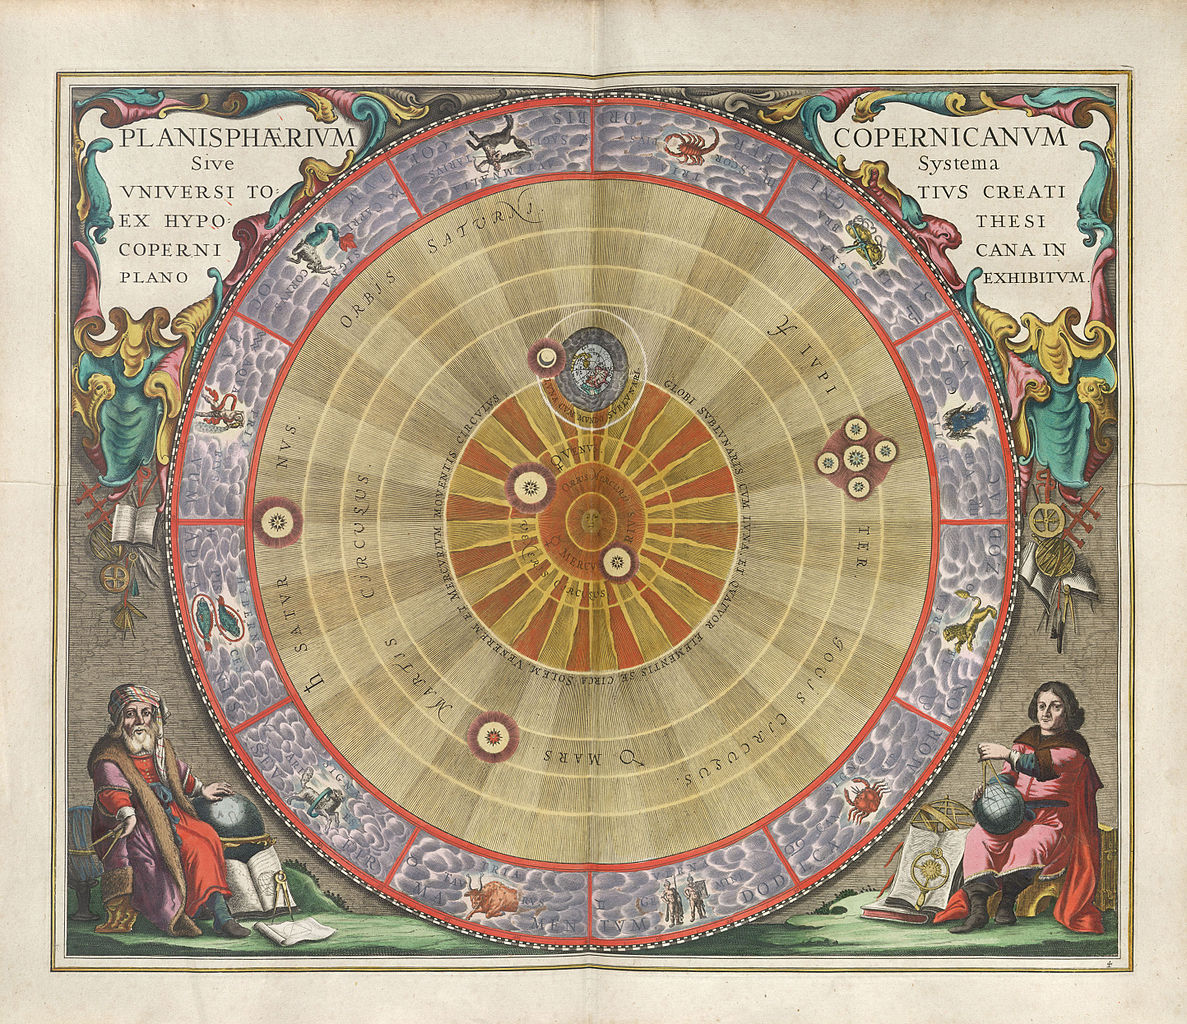 The Copernican Planisphere, illustrated in 1661 by Andreas Cellarius, illustrates Nicolaus Copernicus' model of the solar system, which flew in the face of established (and religious) views of the universe.